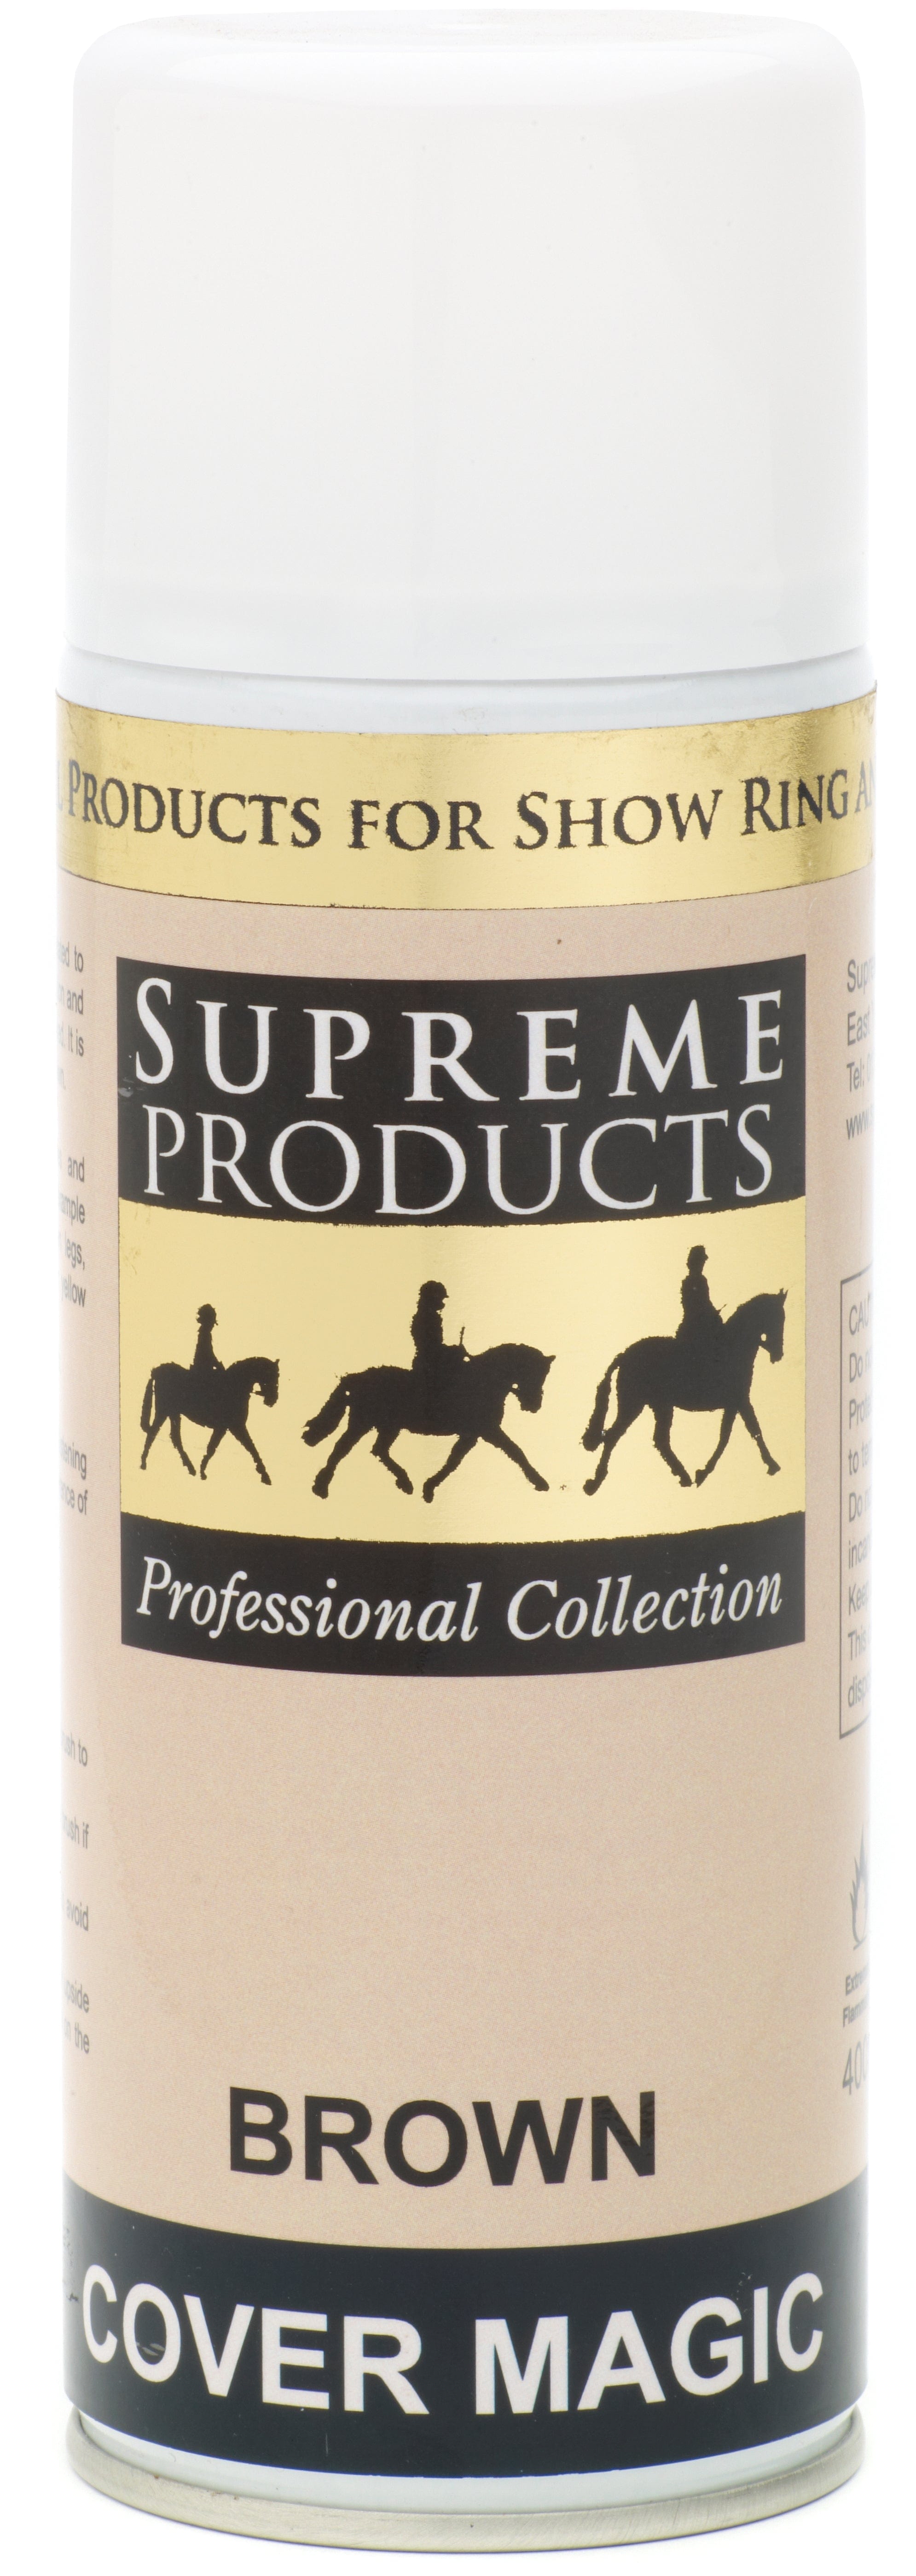 Supreme products cover magic brown